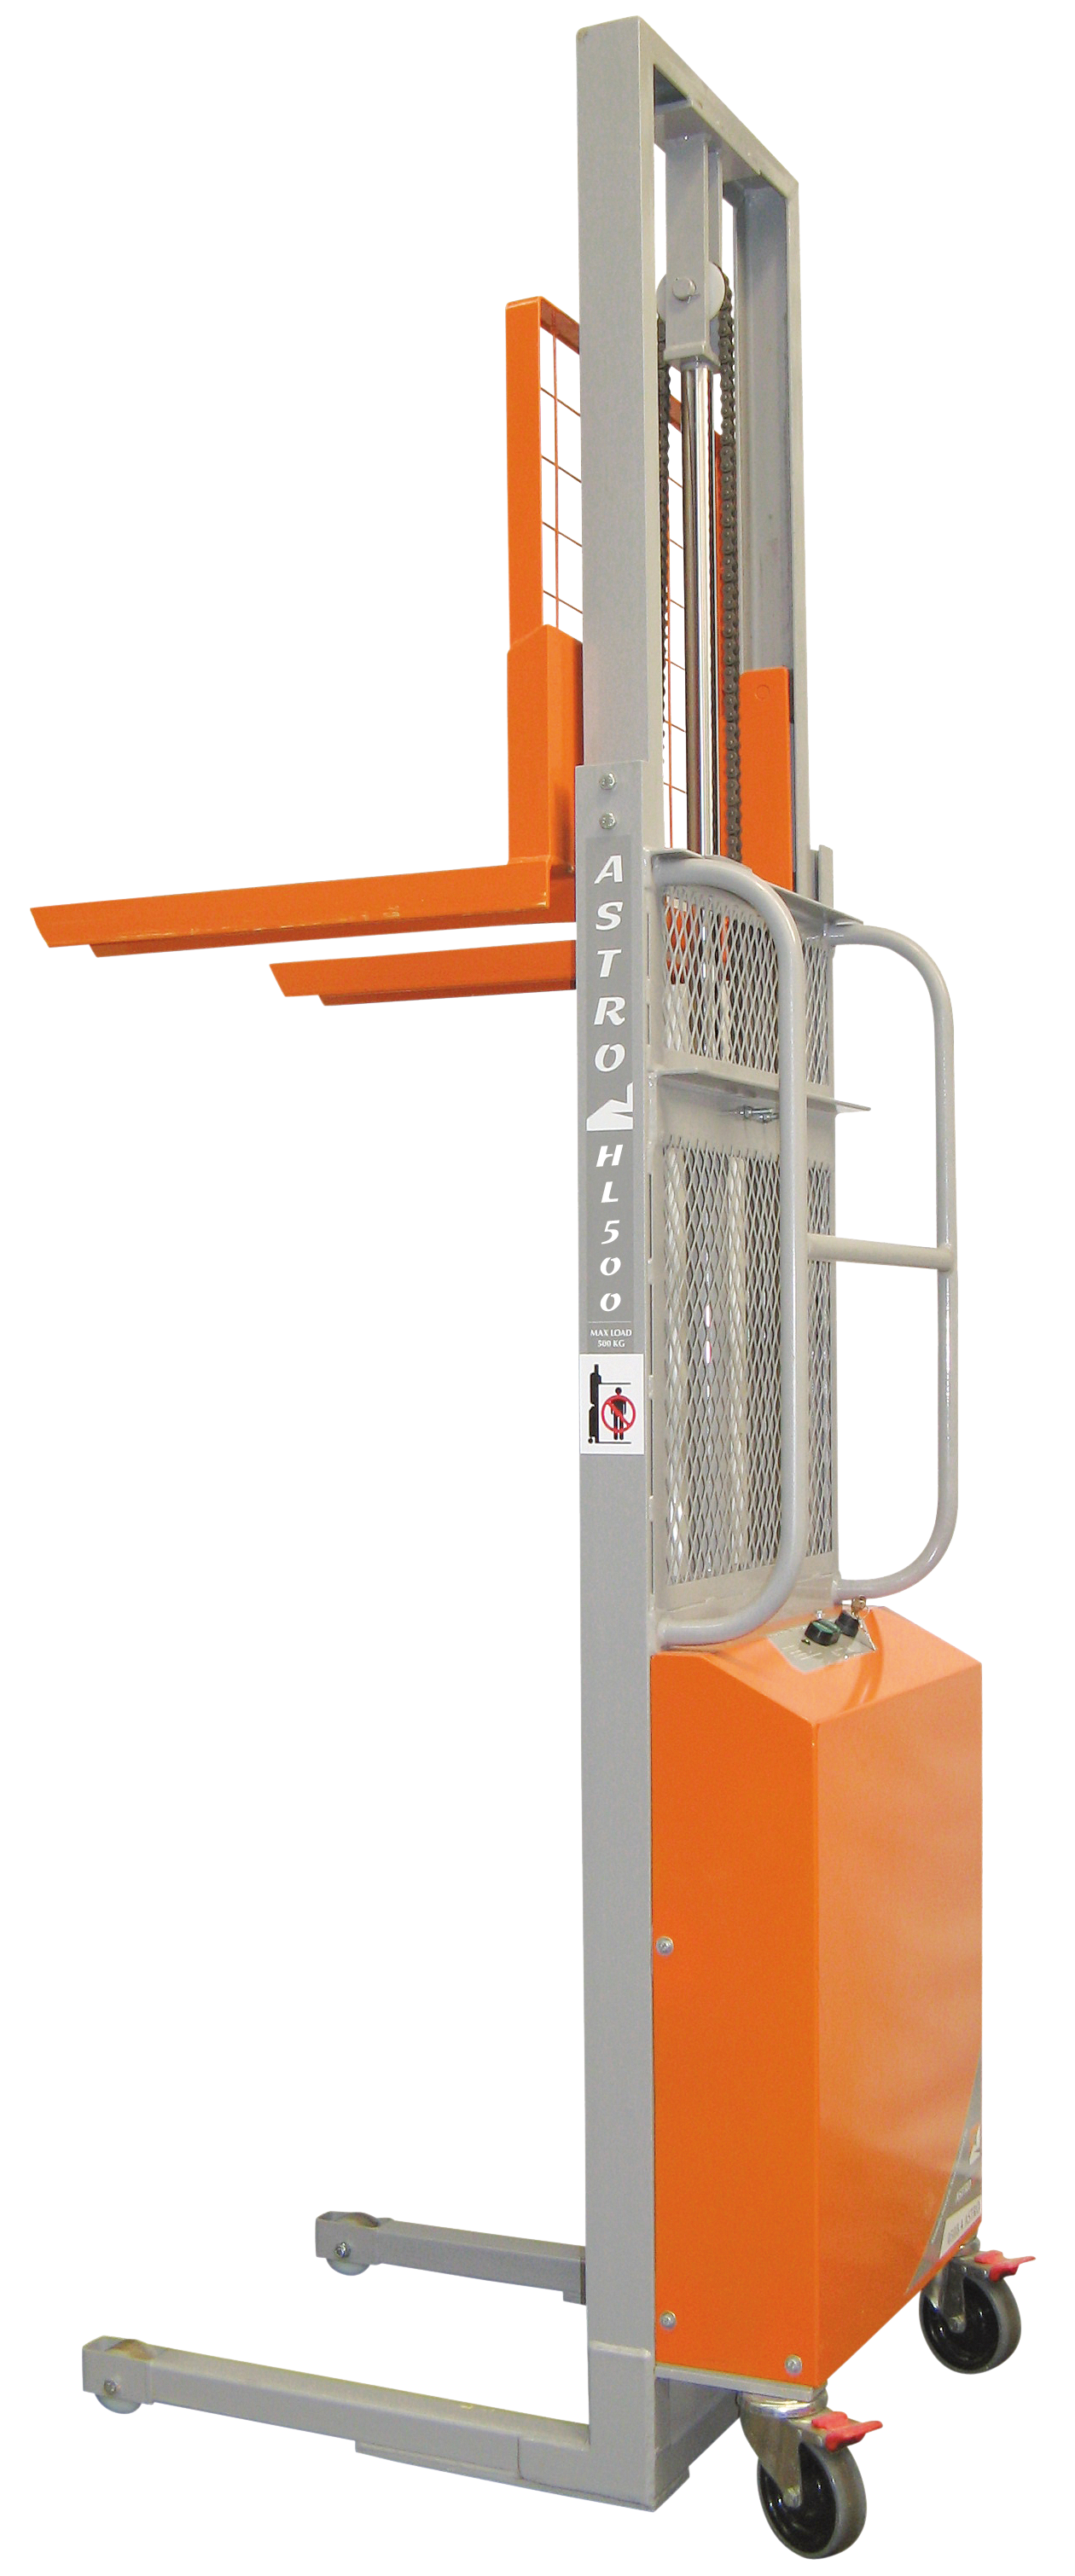 lpg-ast-002, Semi-electric Pallet Stacker (Compact), Pallet Stackers from Astrolift